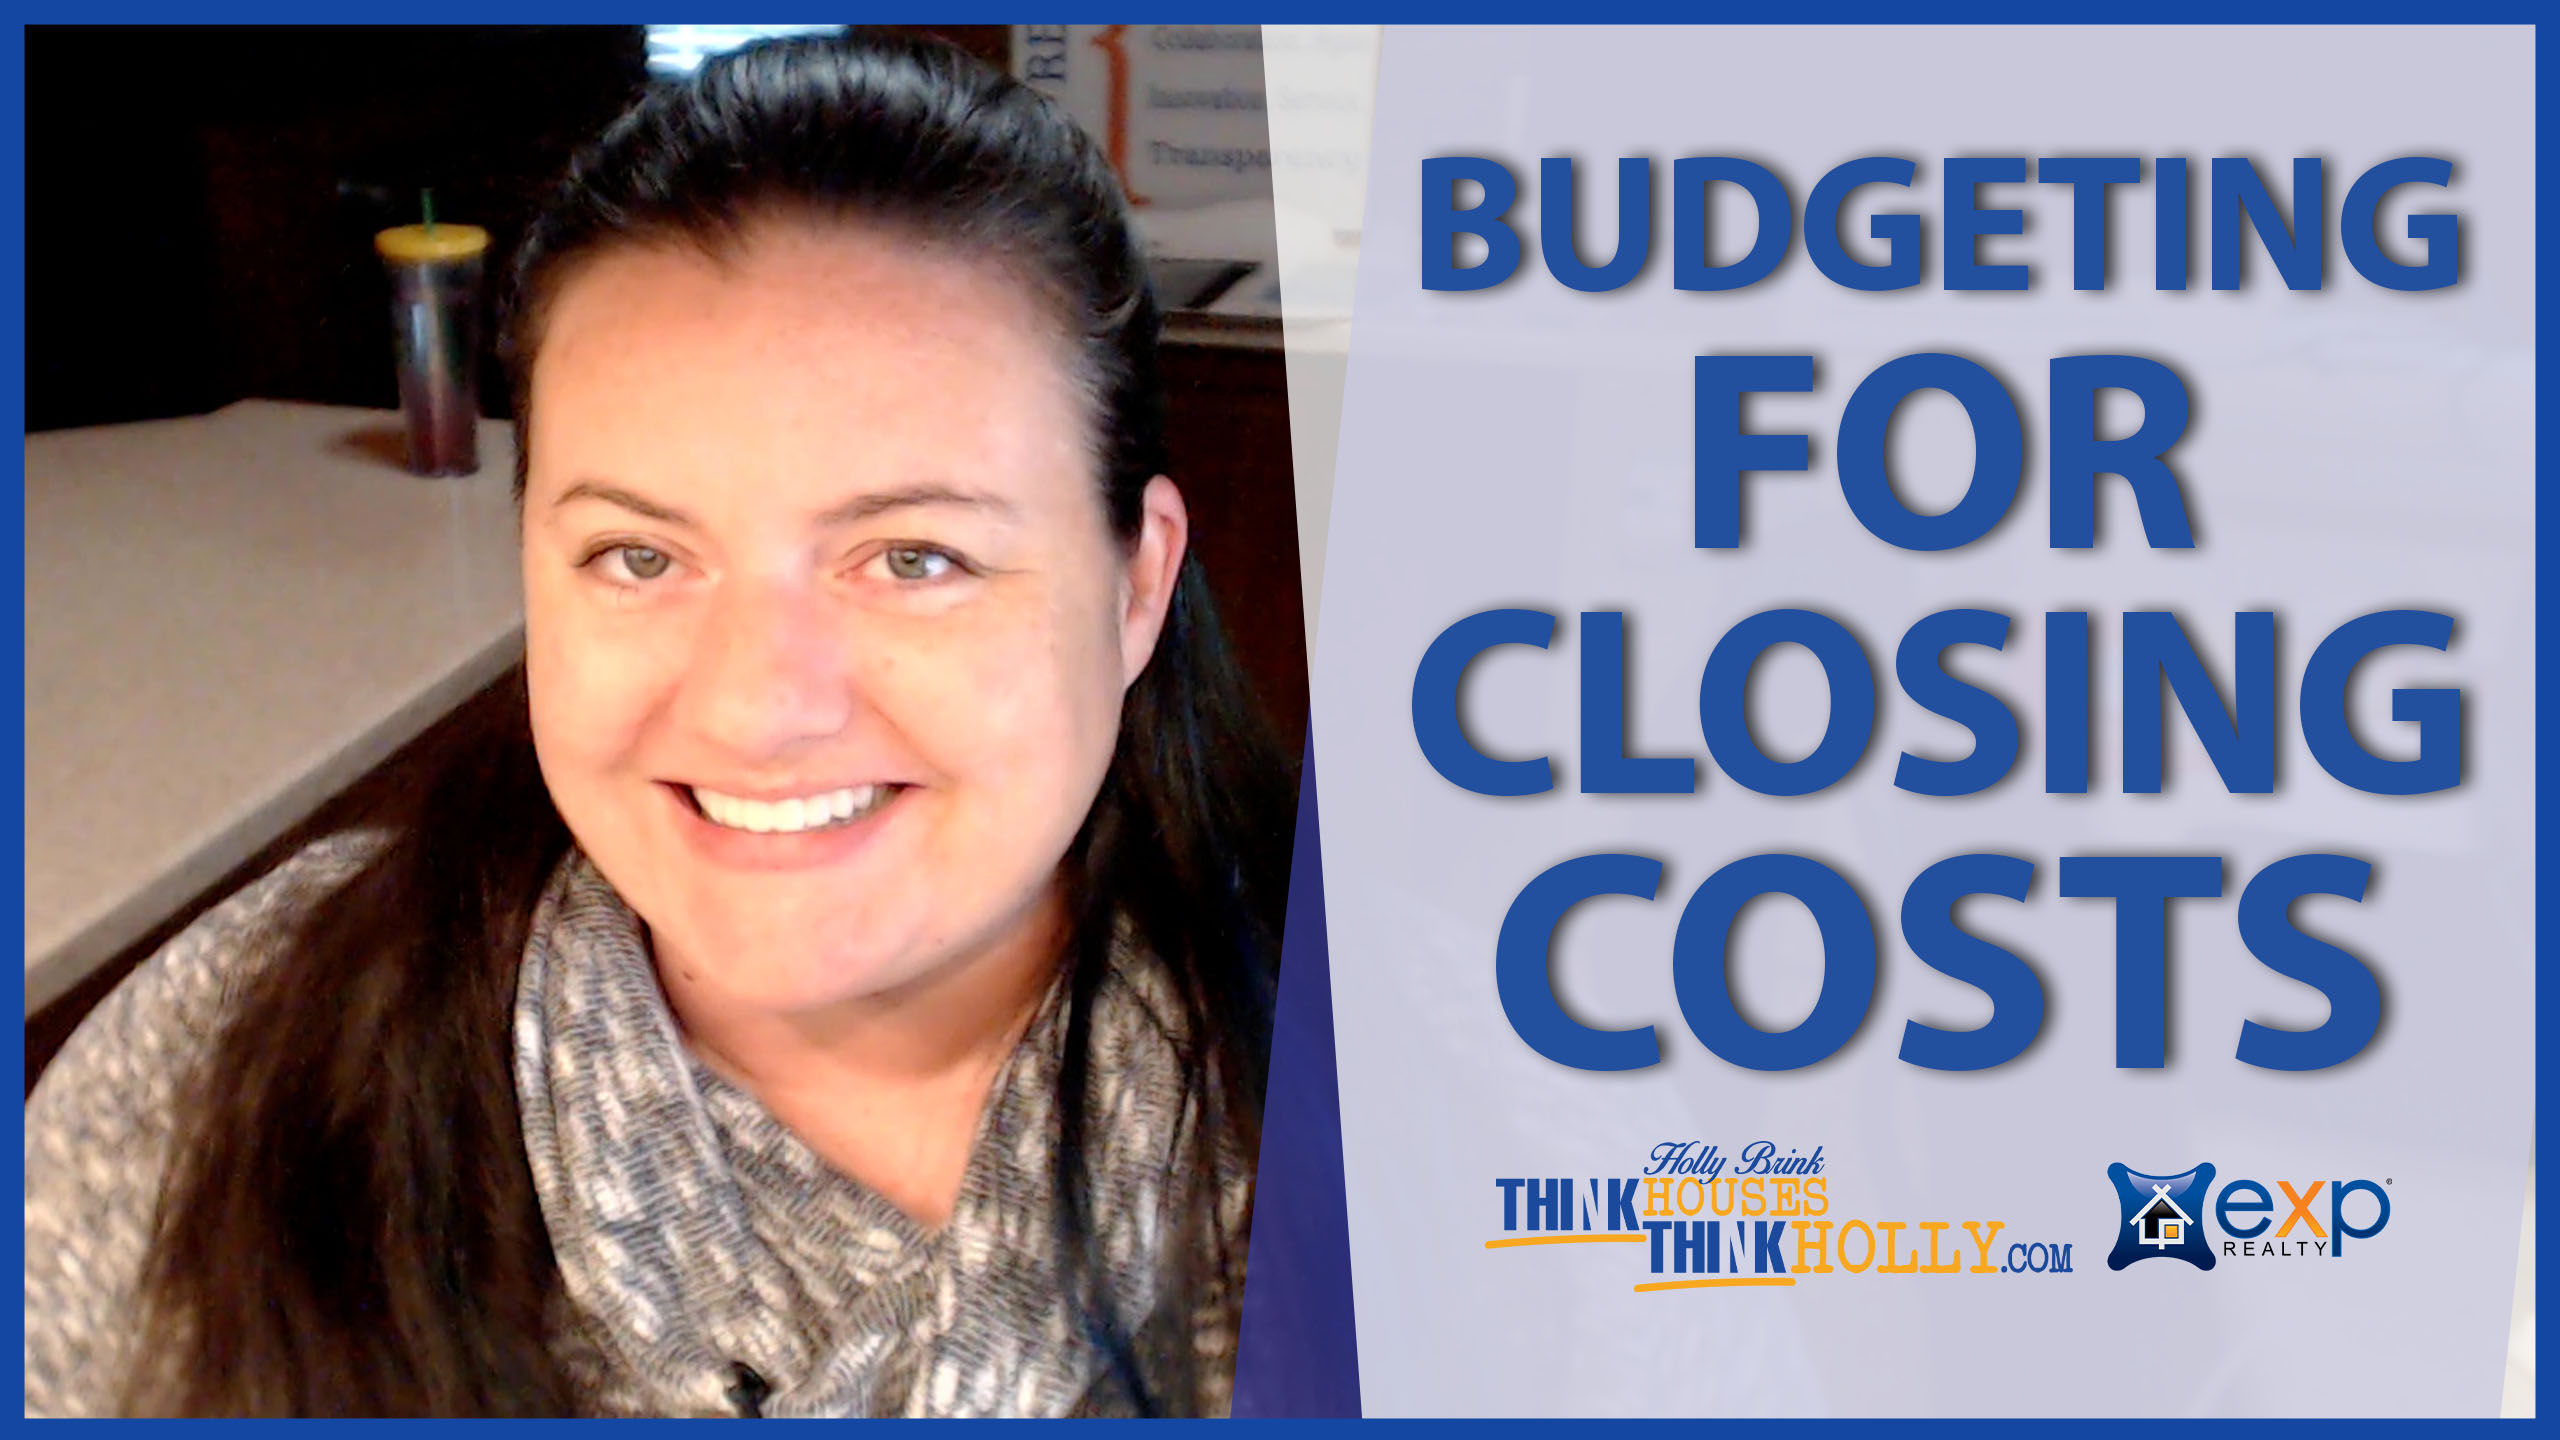 Q: What Closing Costs Should Buyers Budget for?